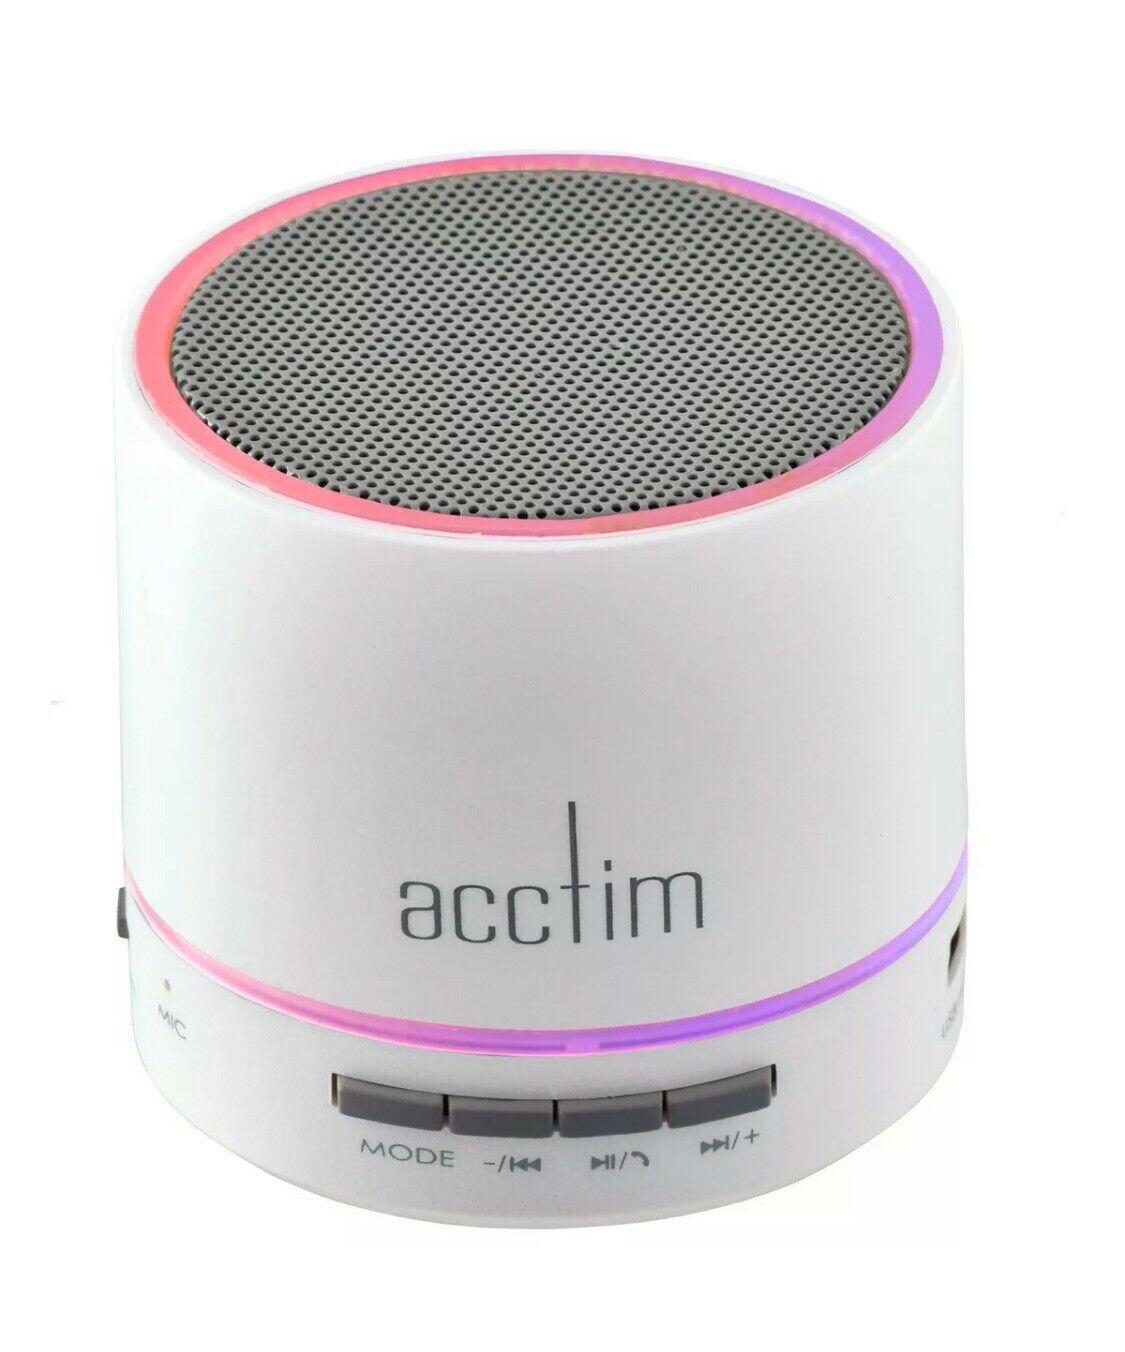 Acctim Tempo Wireless Bluetooth Speaker with Microphone for Hands Free Calling 